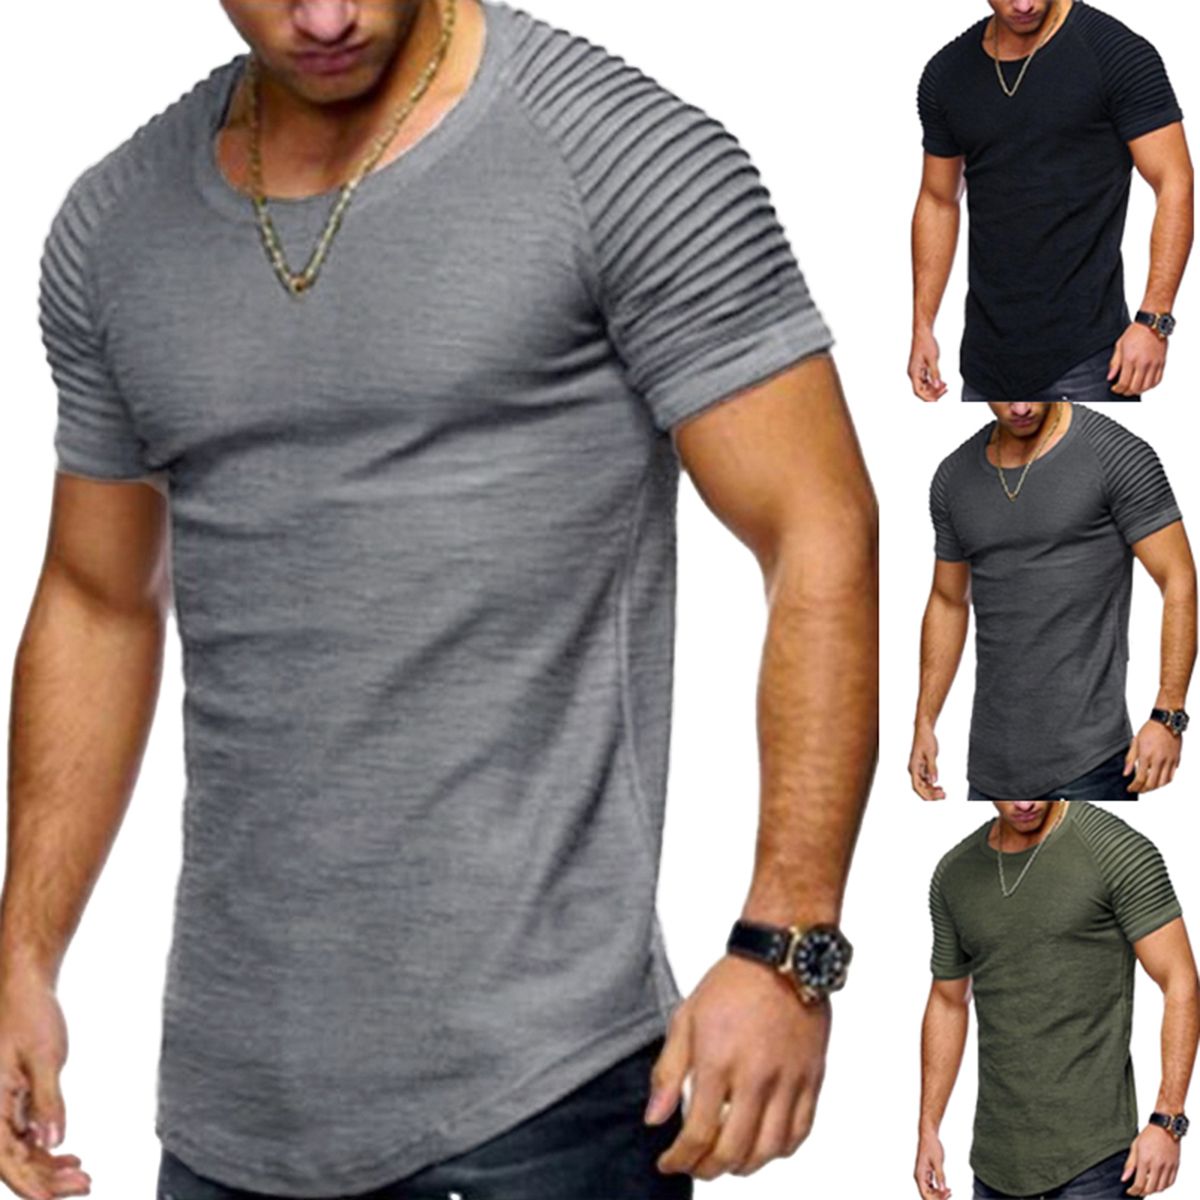 

Men's Oversized Casual Tee Tops Short Sleeve Muscle Sports Gym T Shirts Blouses